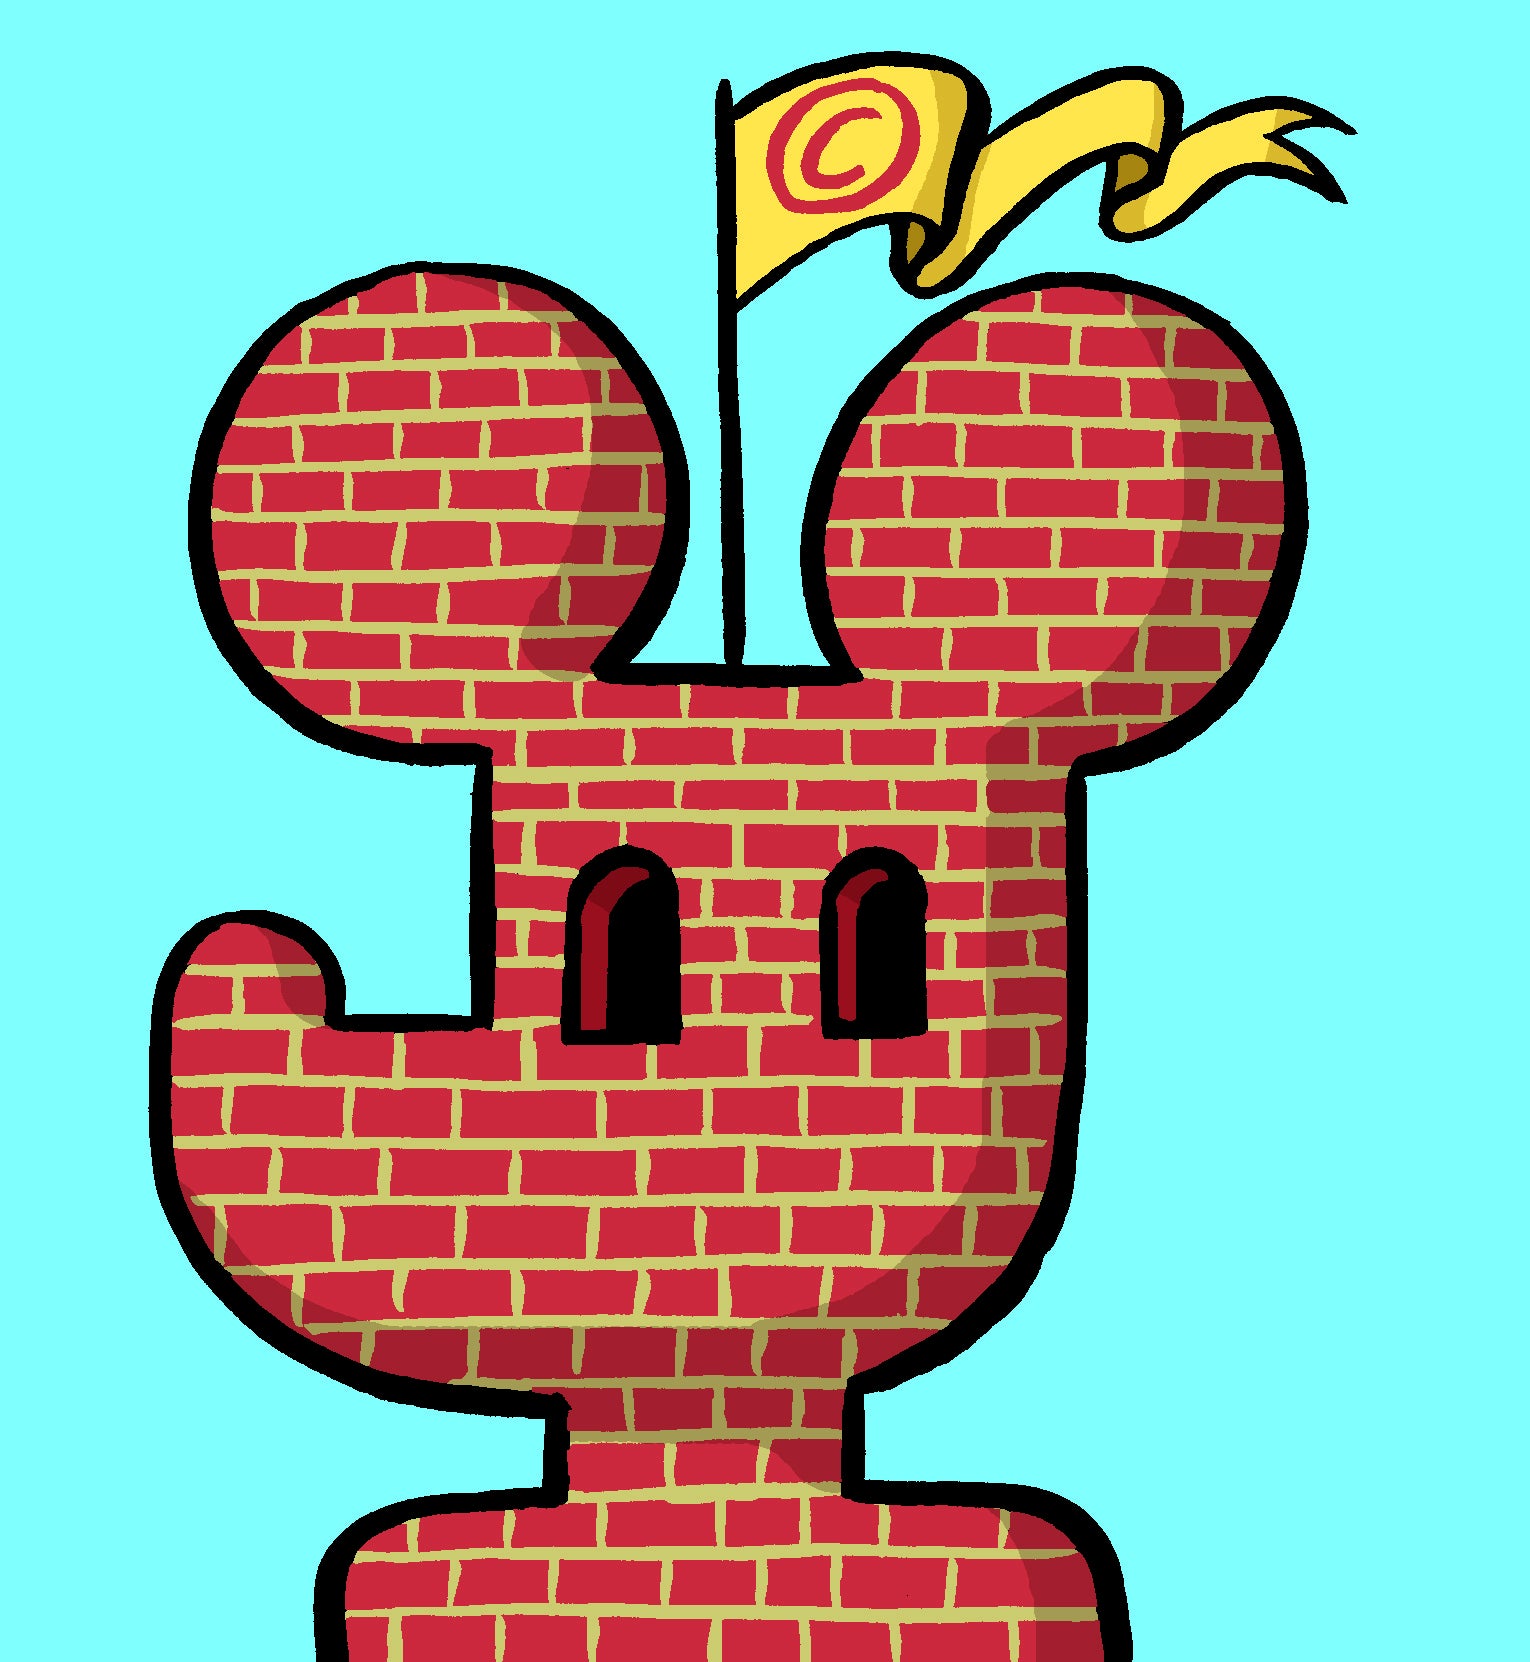 Illustration of Mickey Mouse made of bricks